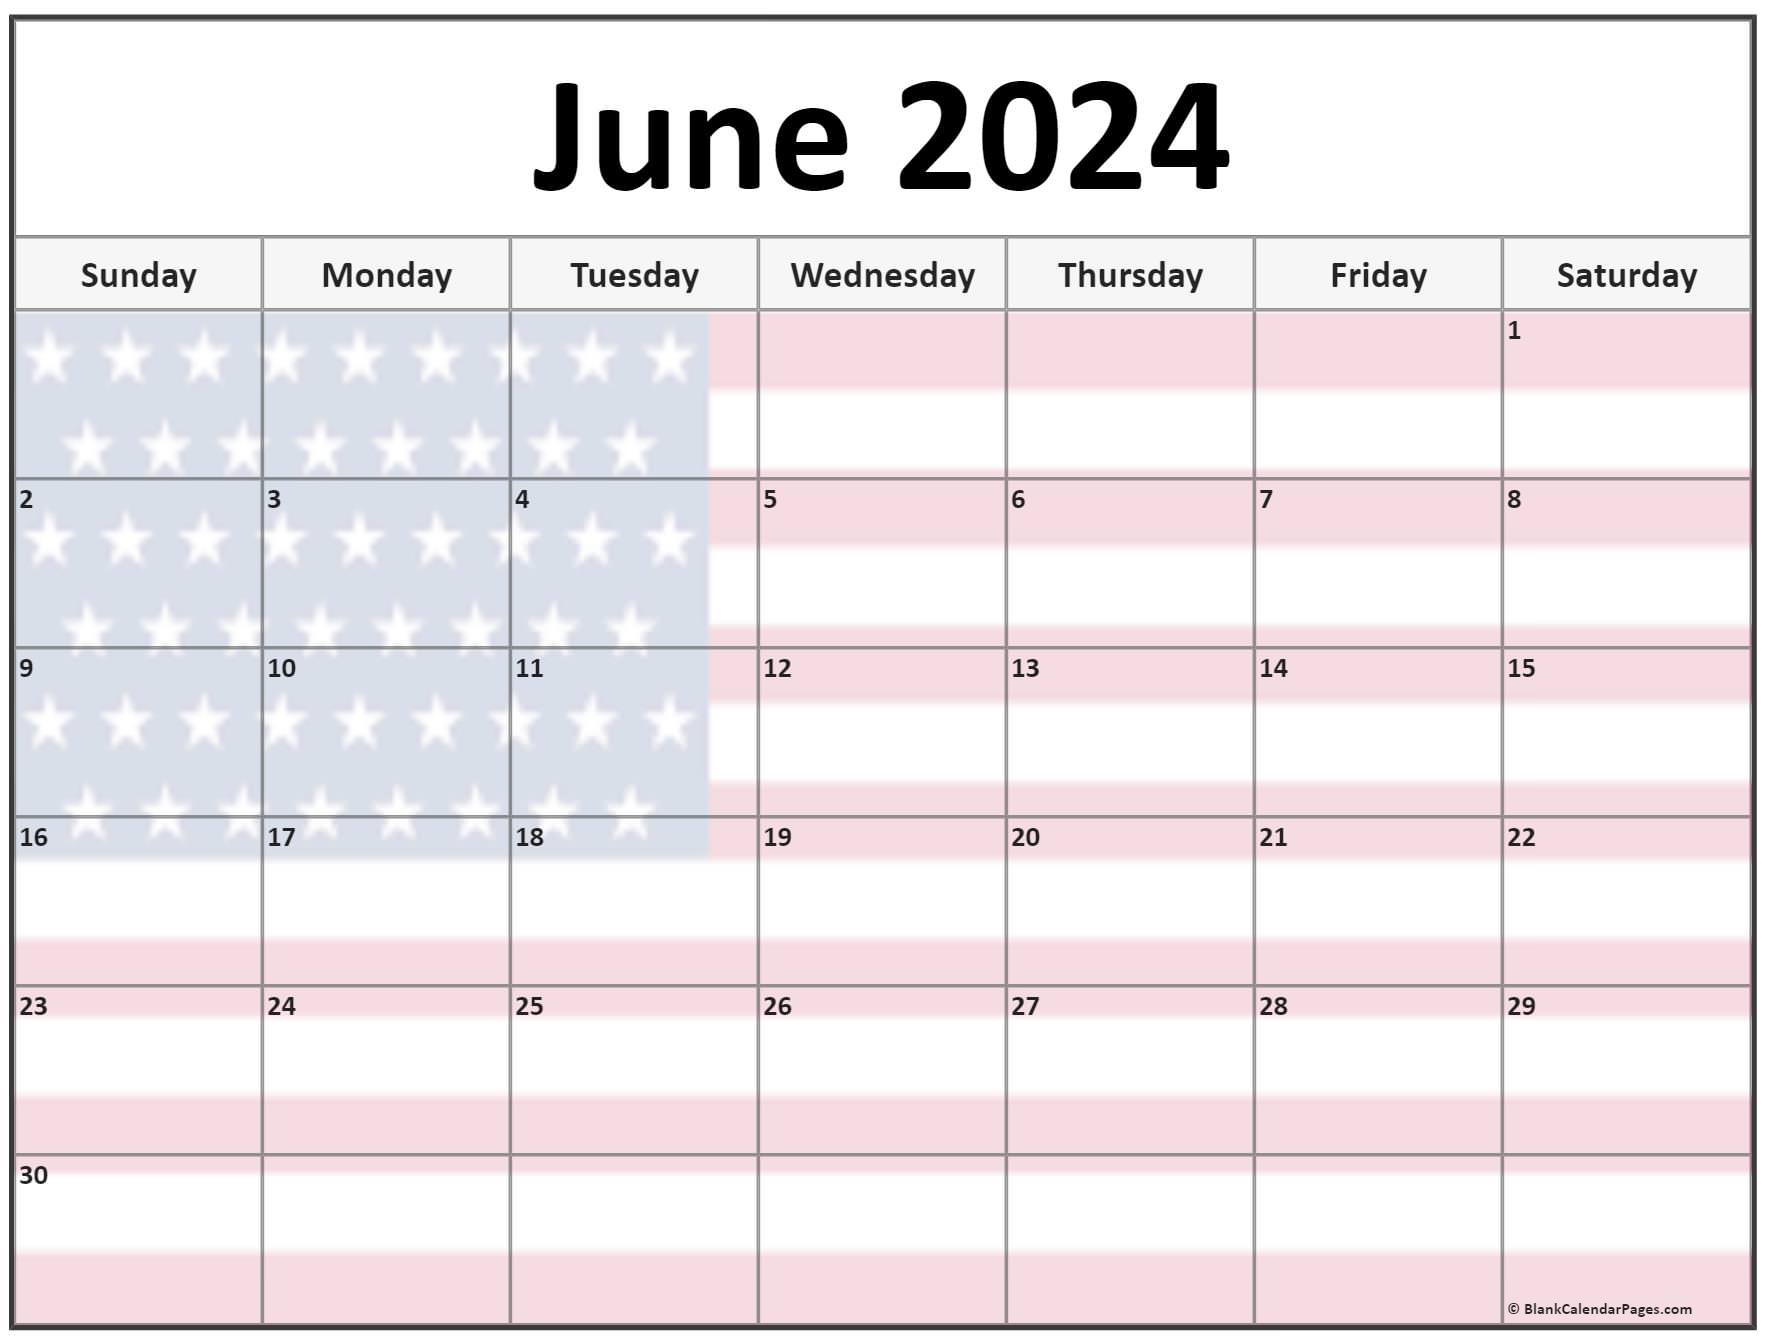 Collection of June 2023 photo calendars with image filters.